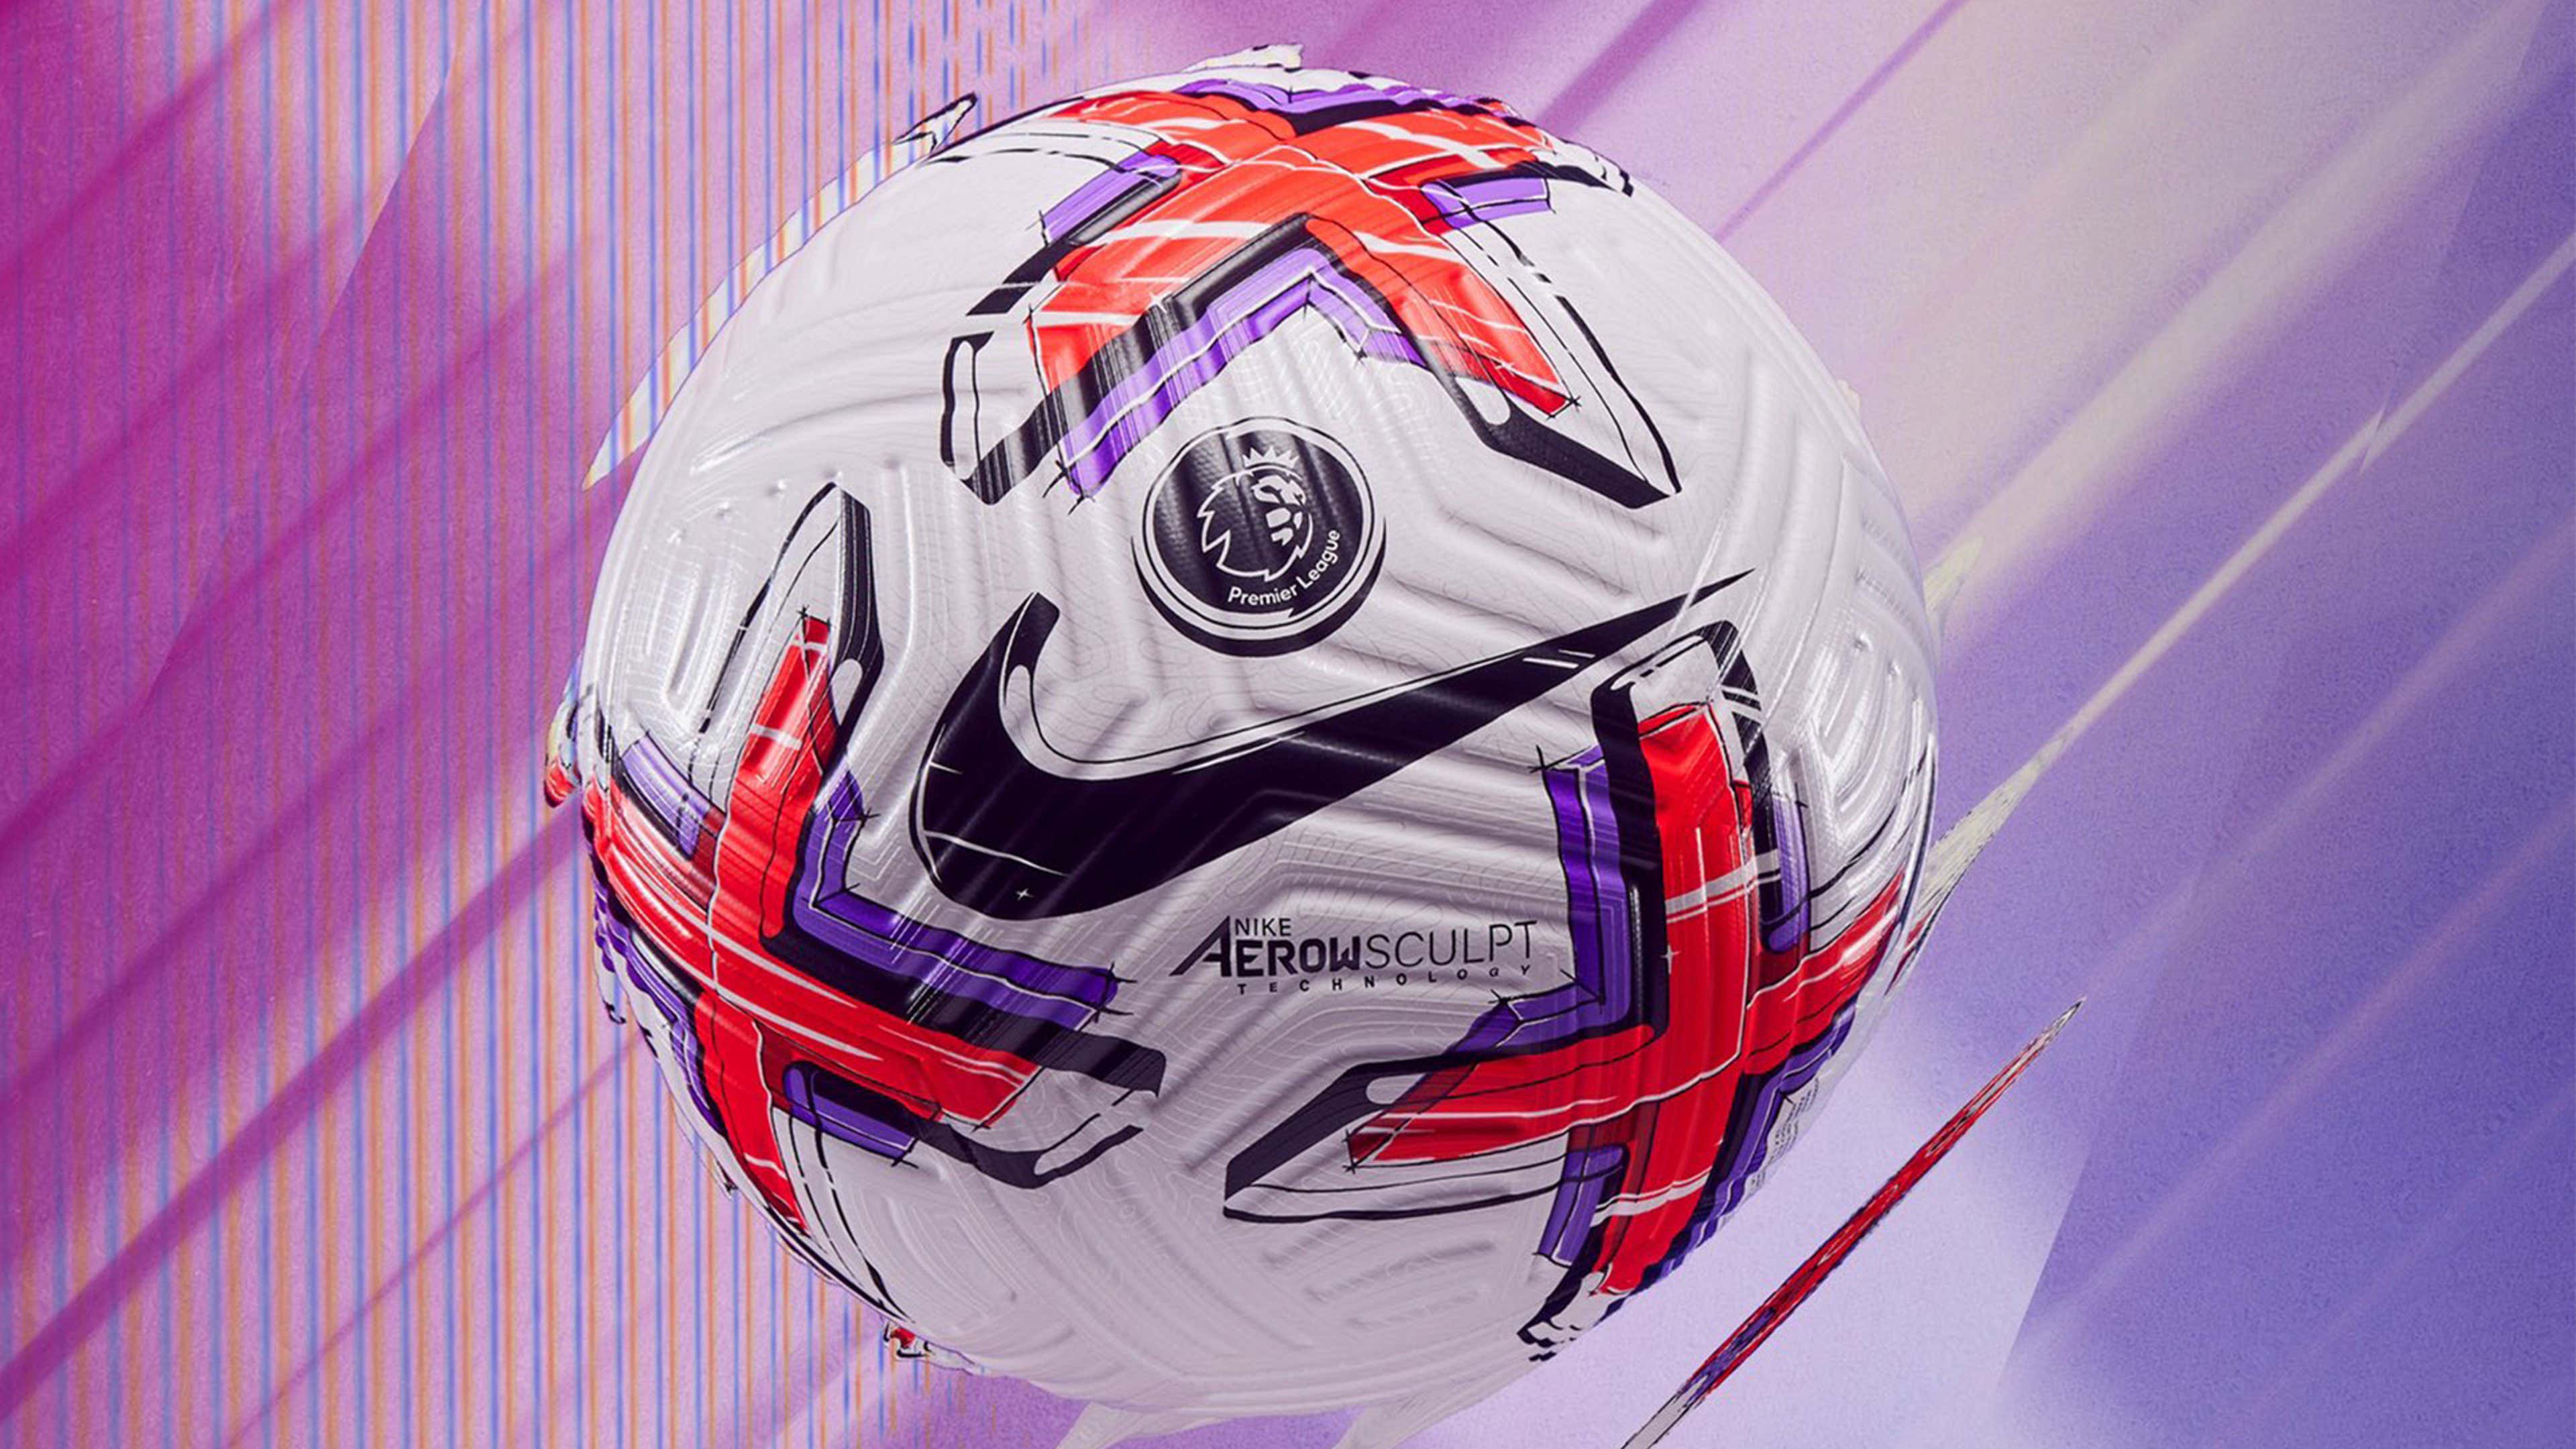 La Liga unveils new official ball for the upcoming matches of the